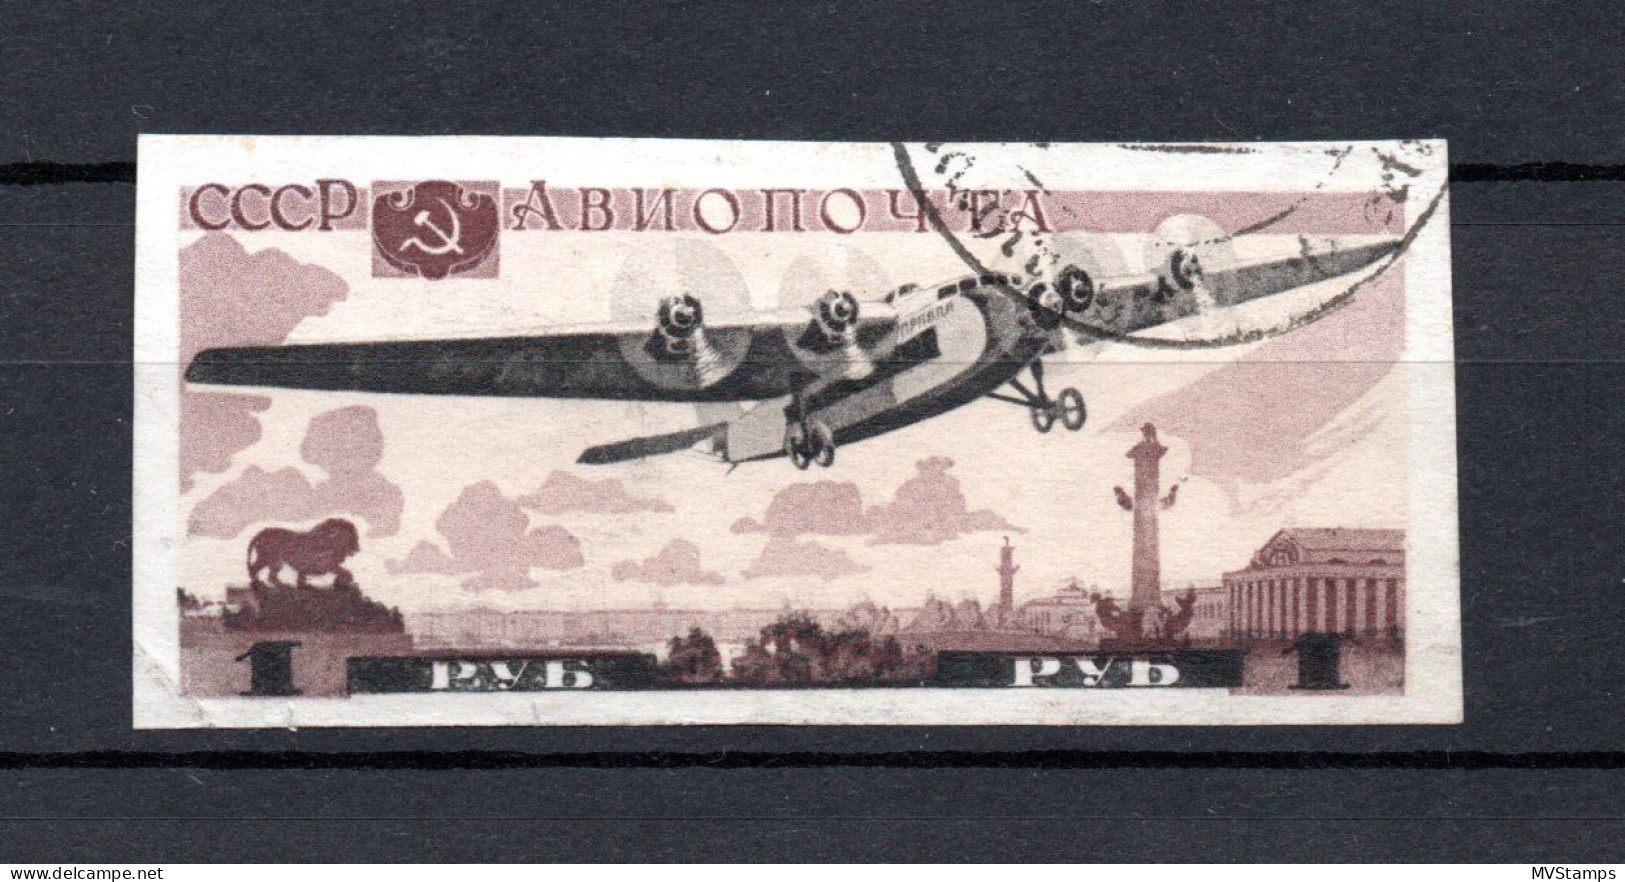 Russia 1937 Old IMPERVED Airmail Exhibition Stamp (Michel 570), From Sheet Used - Used Stamps